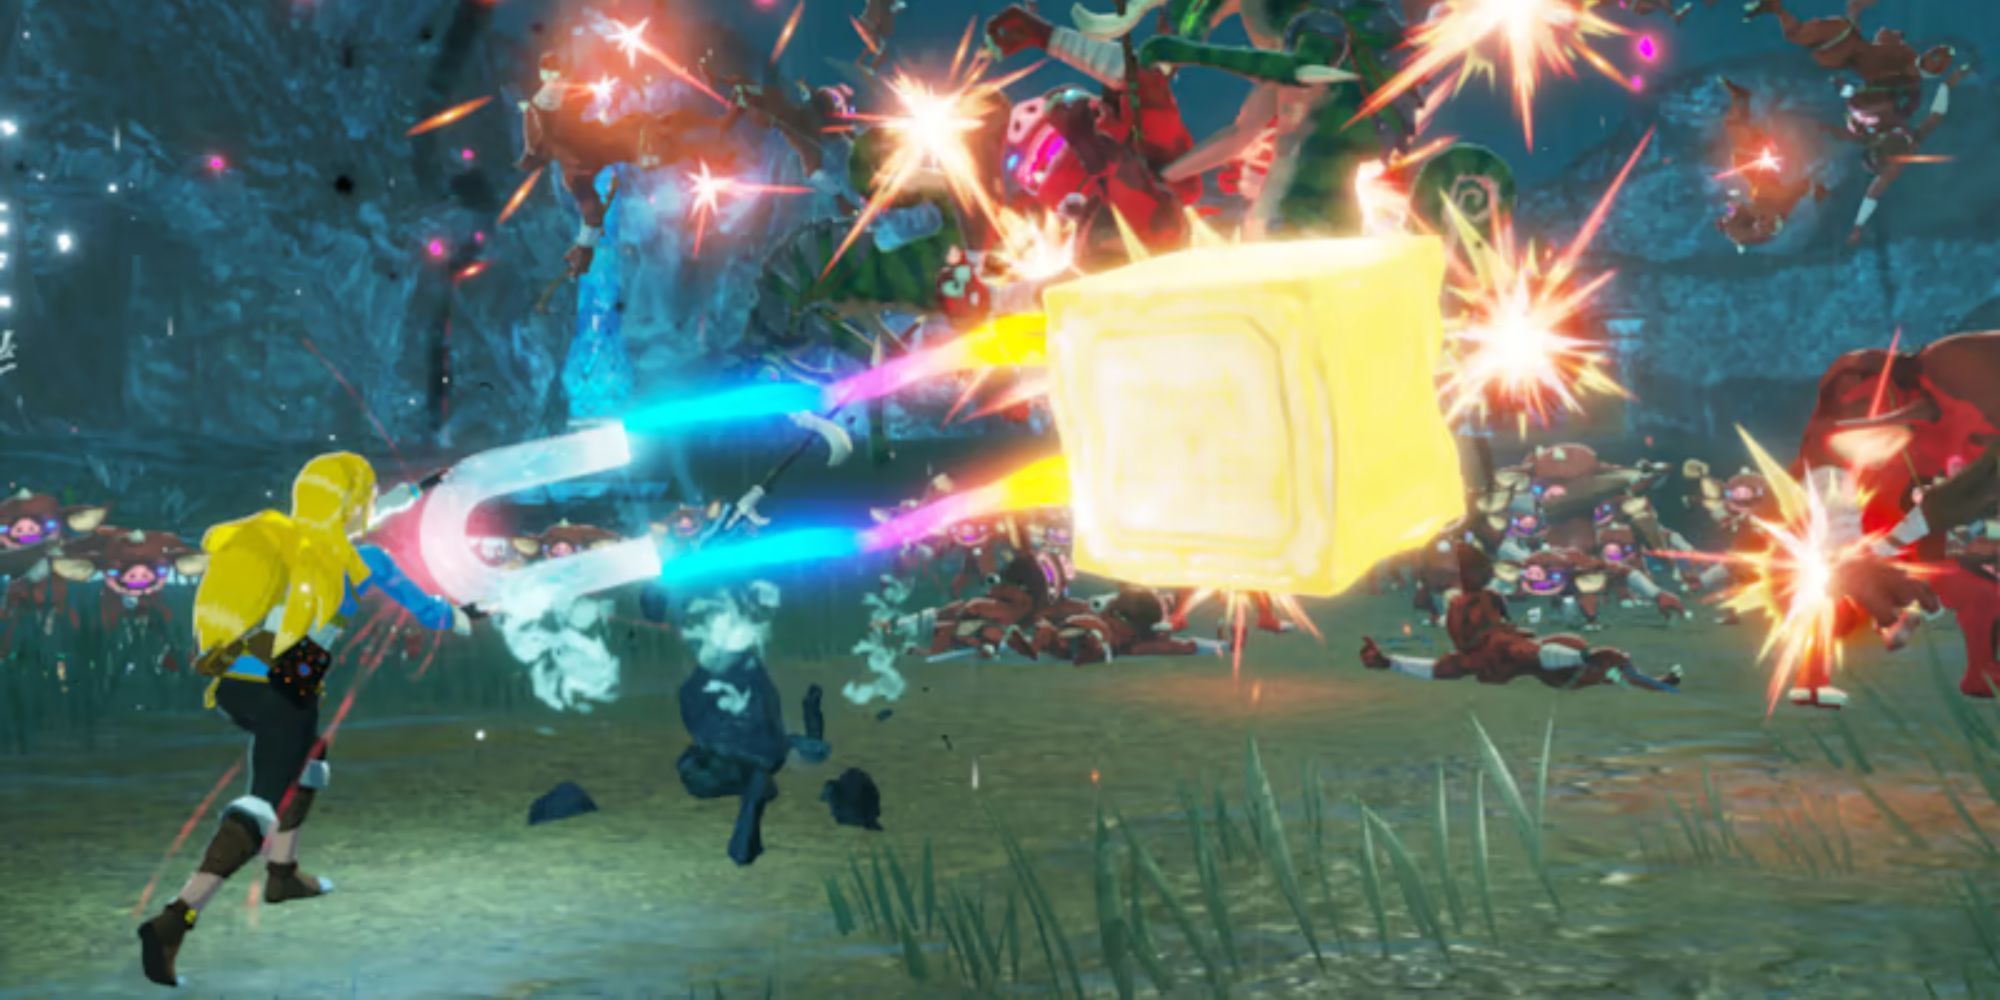 Zelda uses Magnesis to attack a group of Bokoblins